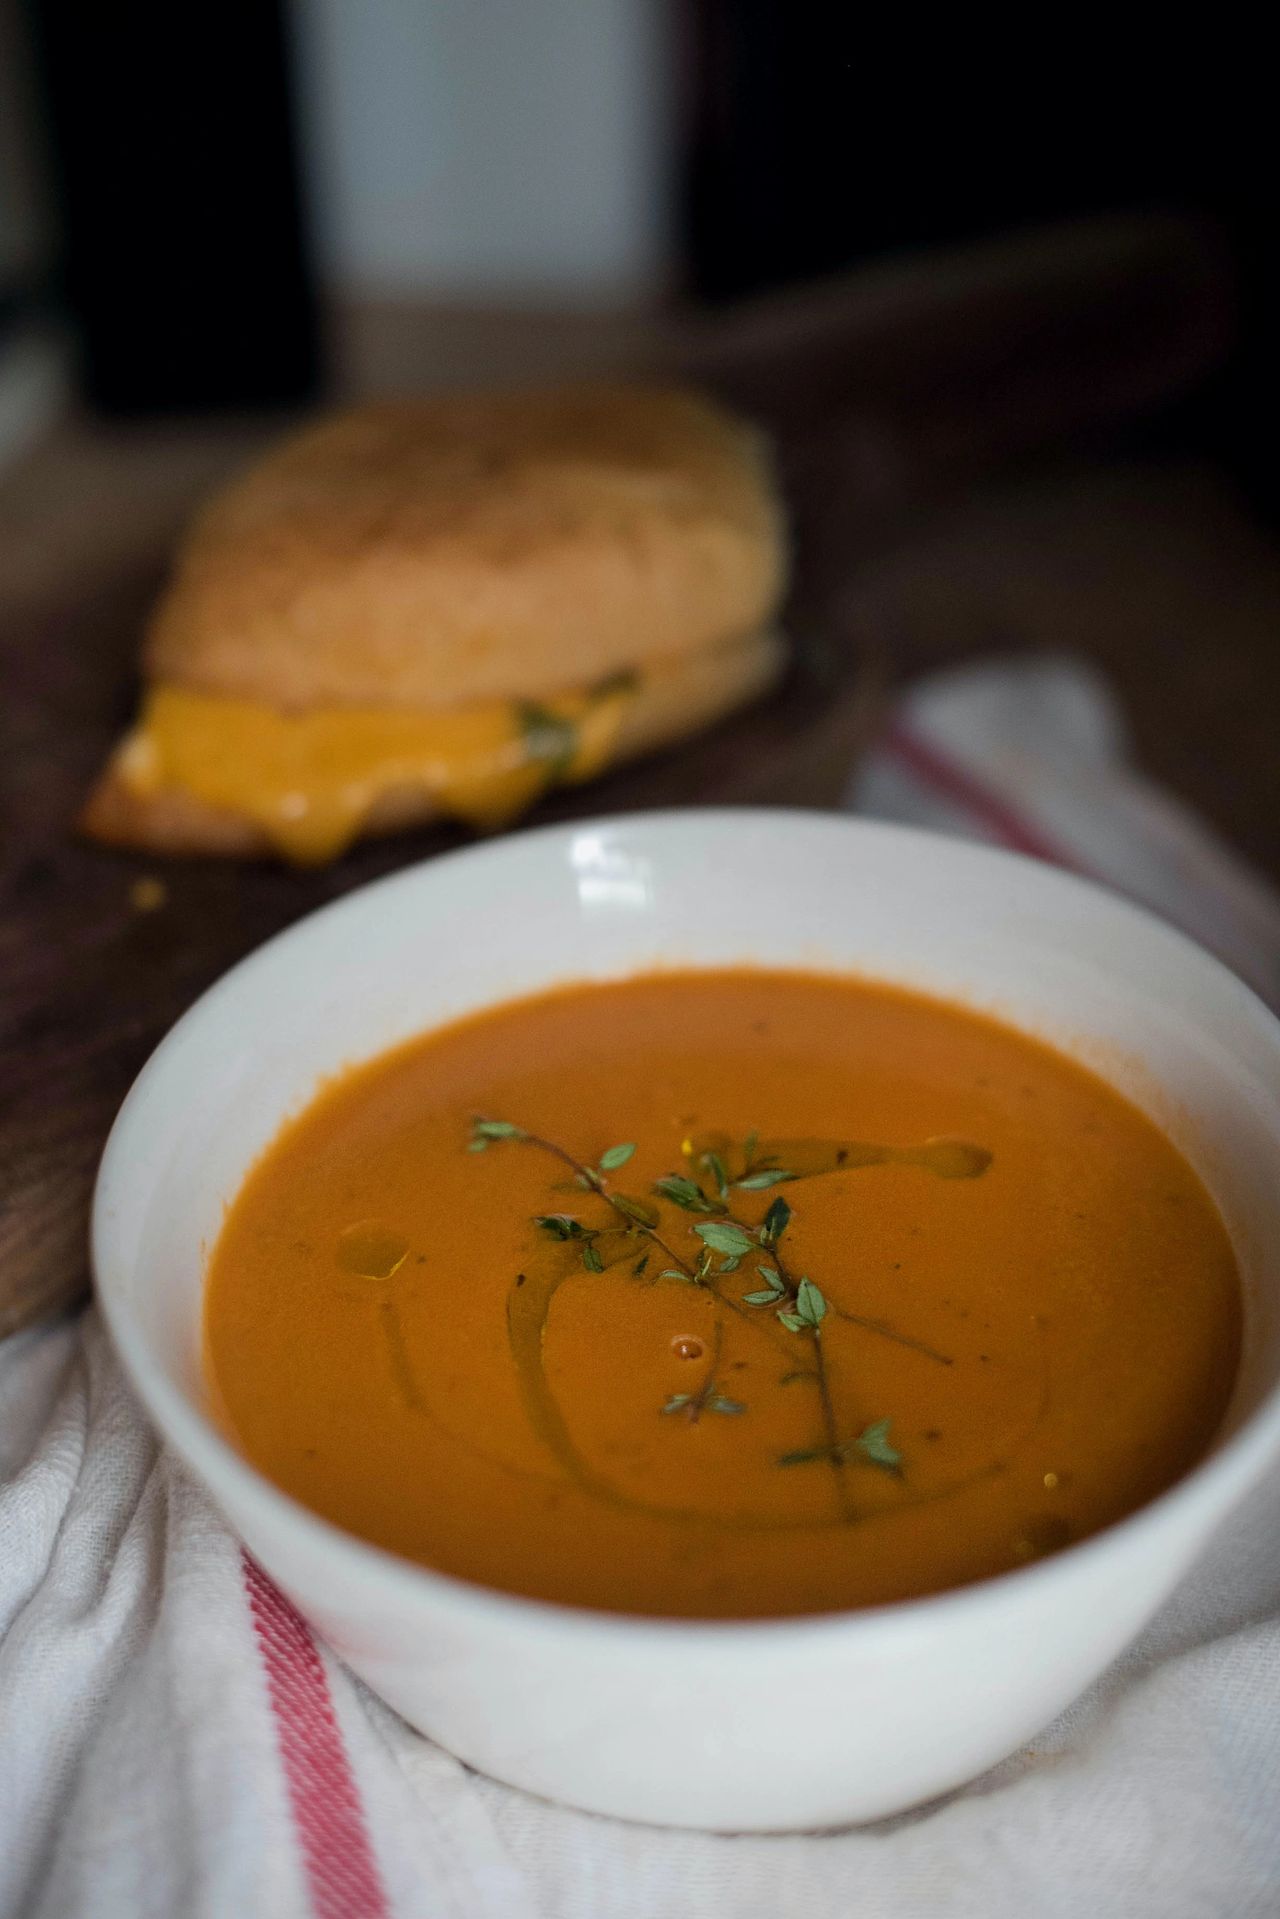 Tomato soup with grilled cheese in the background